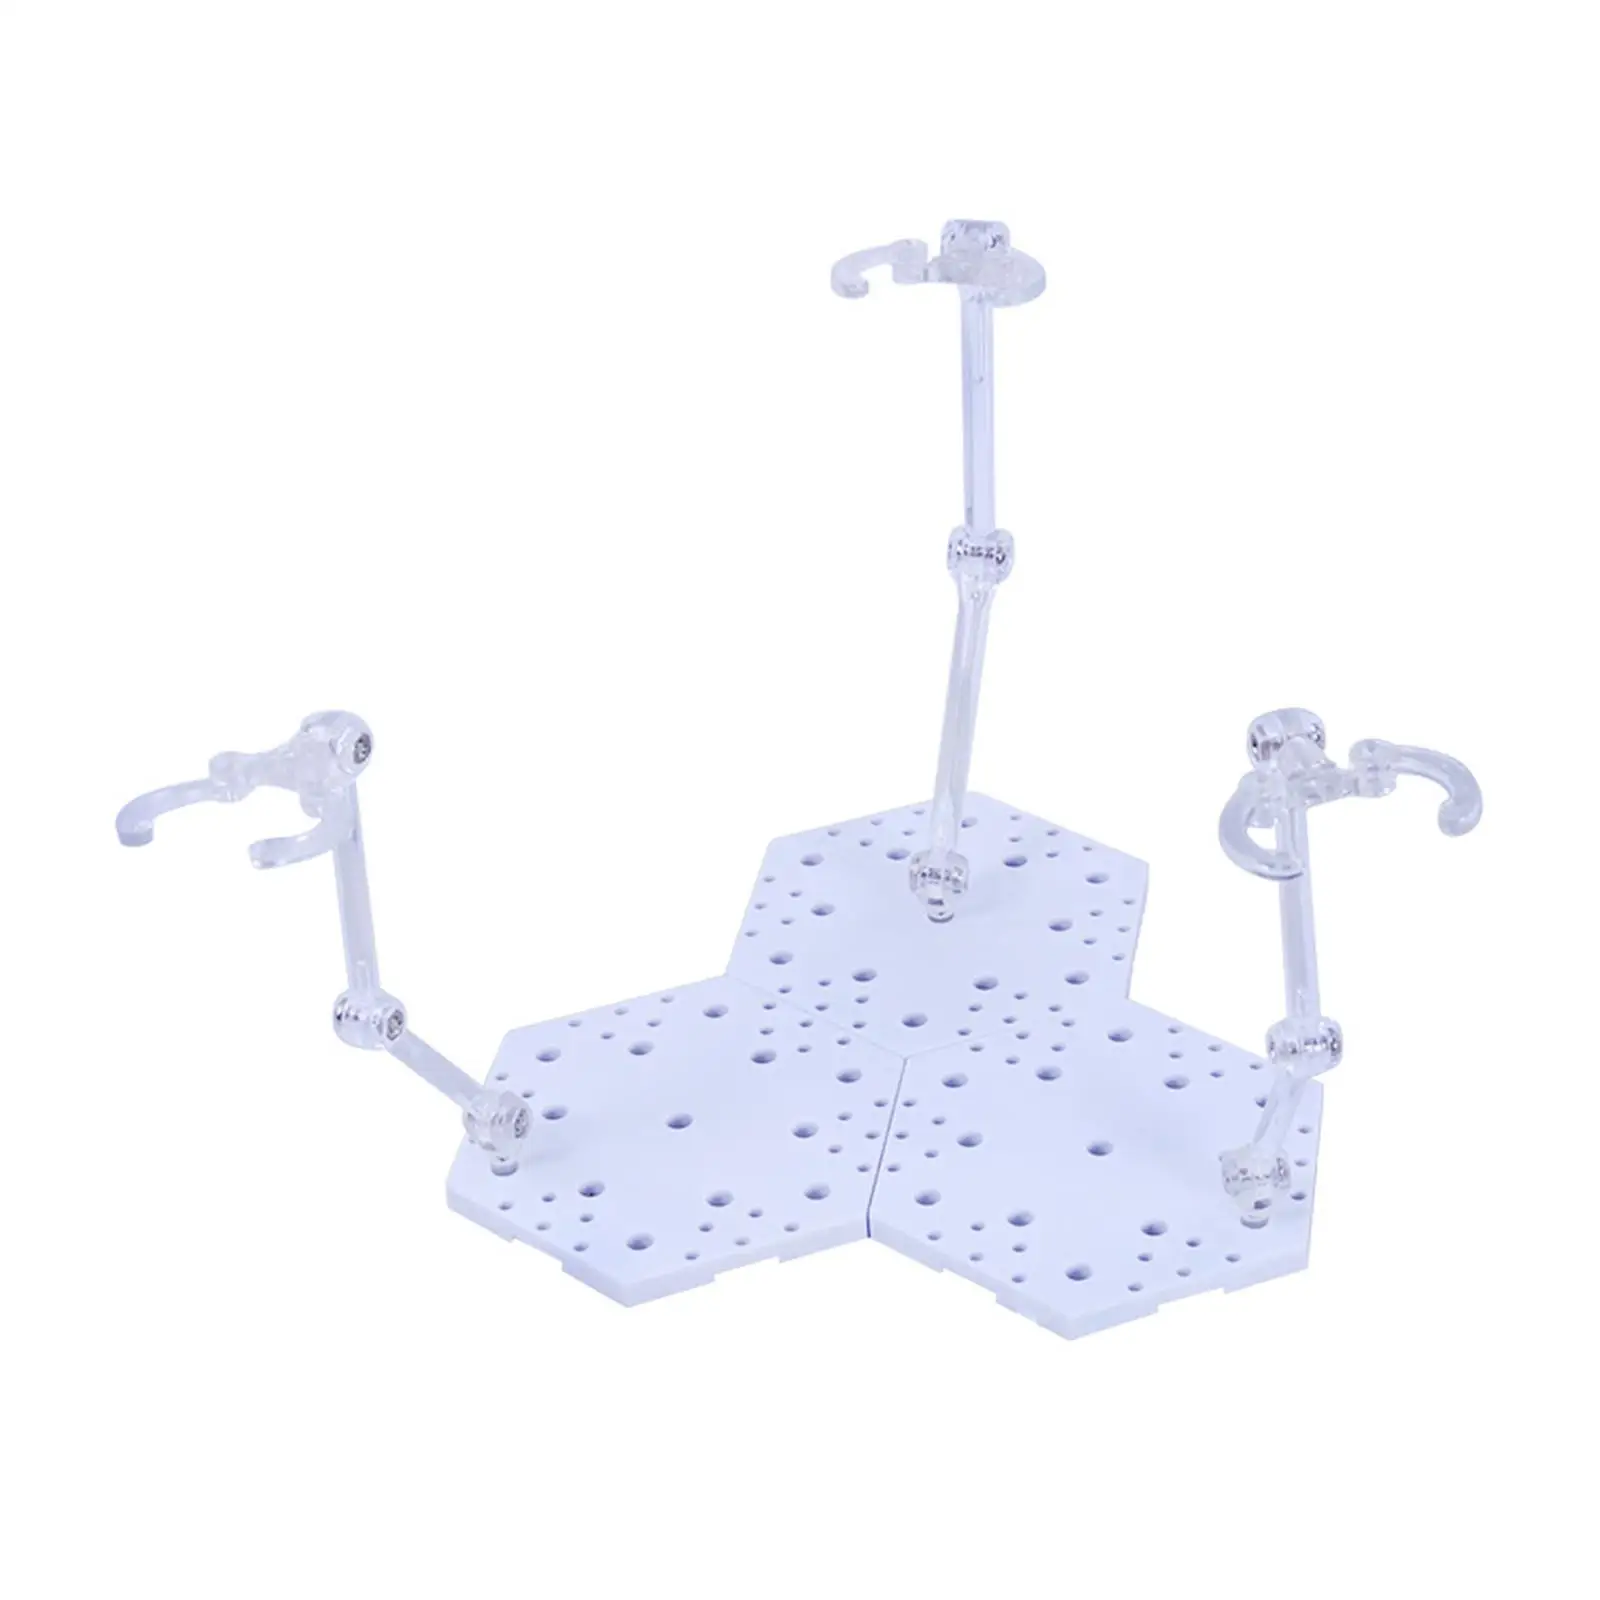 Sturdy Figure Base Display Support Stand Rack Holder for Doll Model Toys DIY Accessories